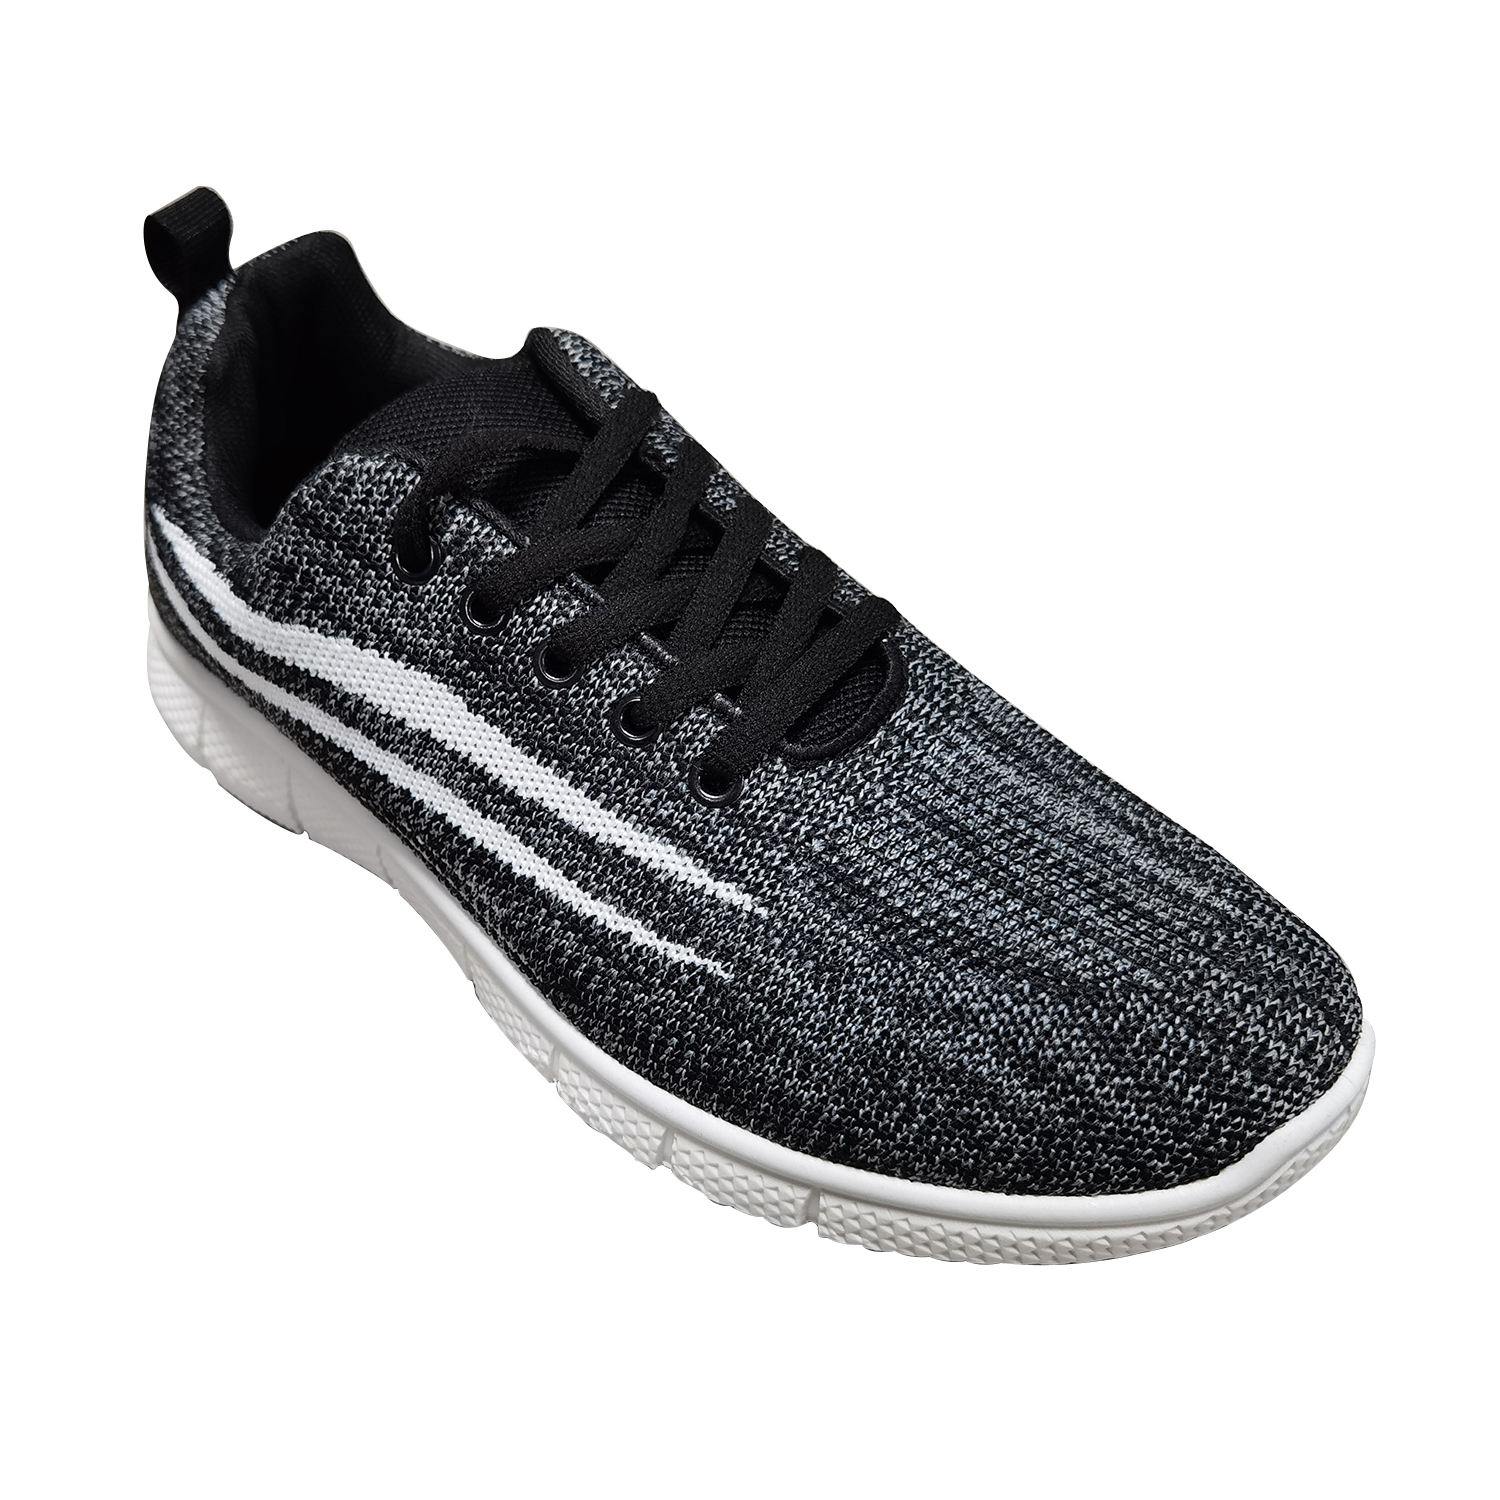 Durable and Stylish Athletic Shoes for Every Sports Enthusiast